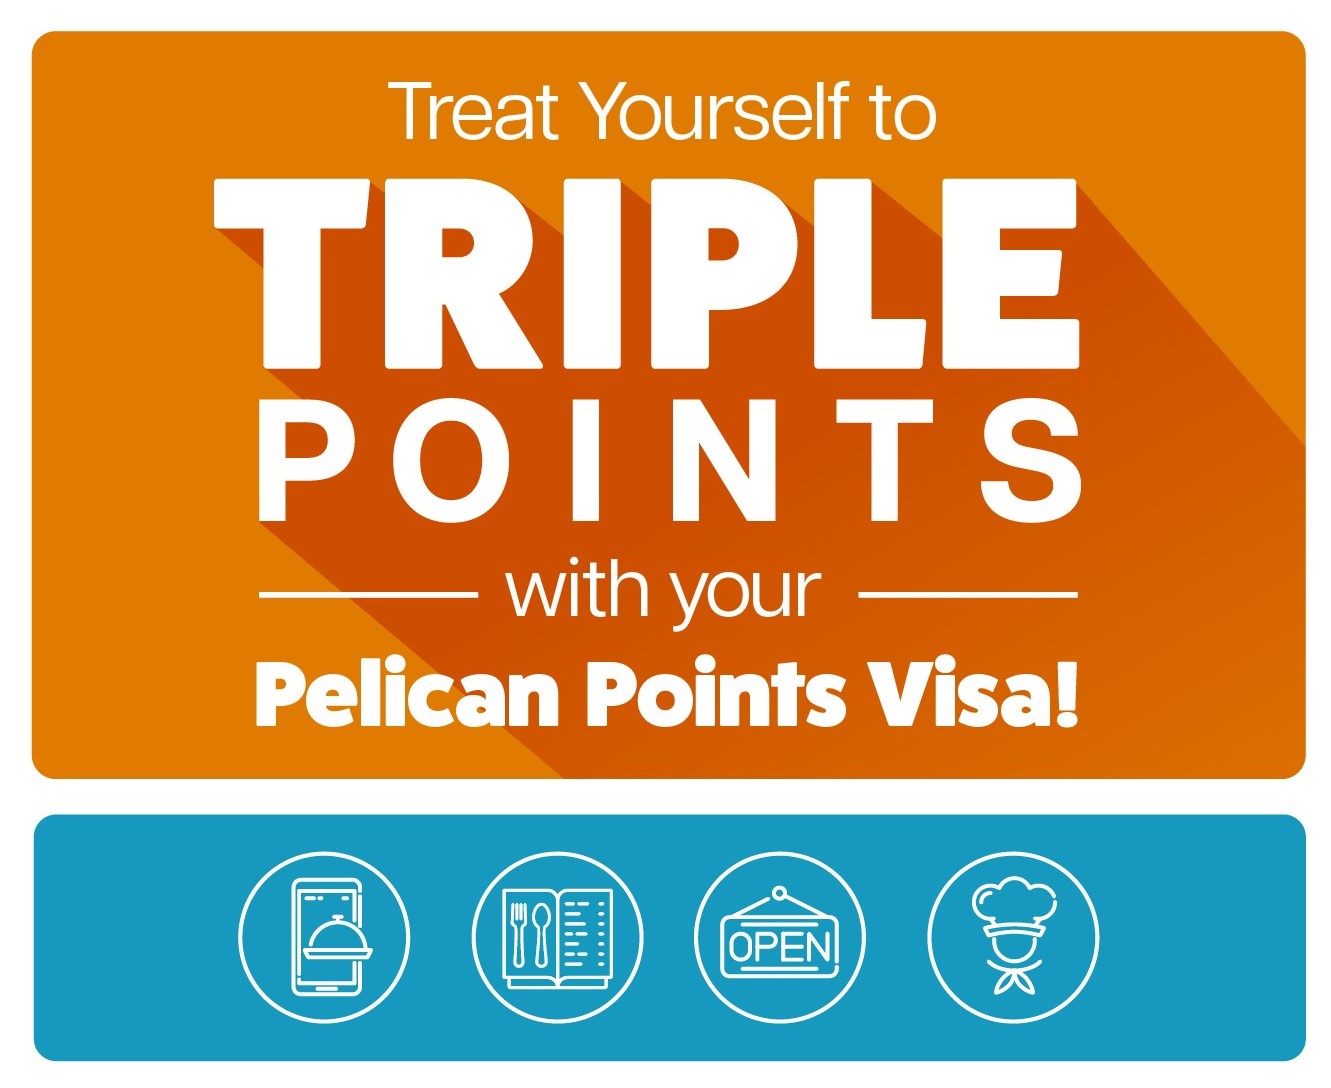 Treat Yourself to Triple Points with your Pelican Points Visa!